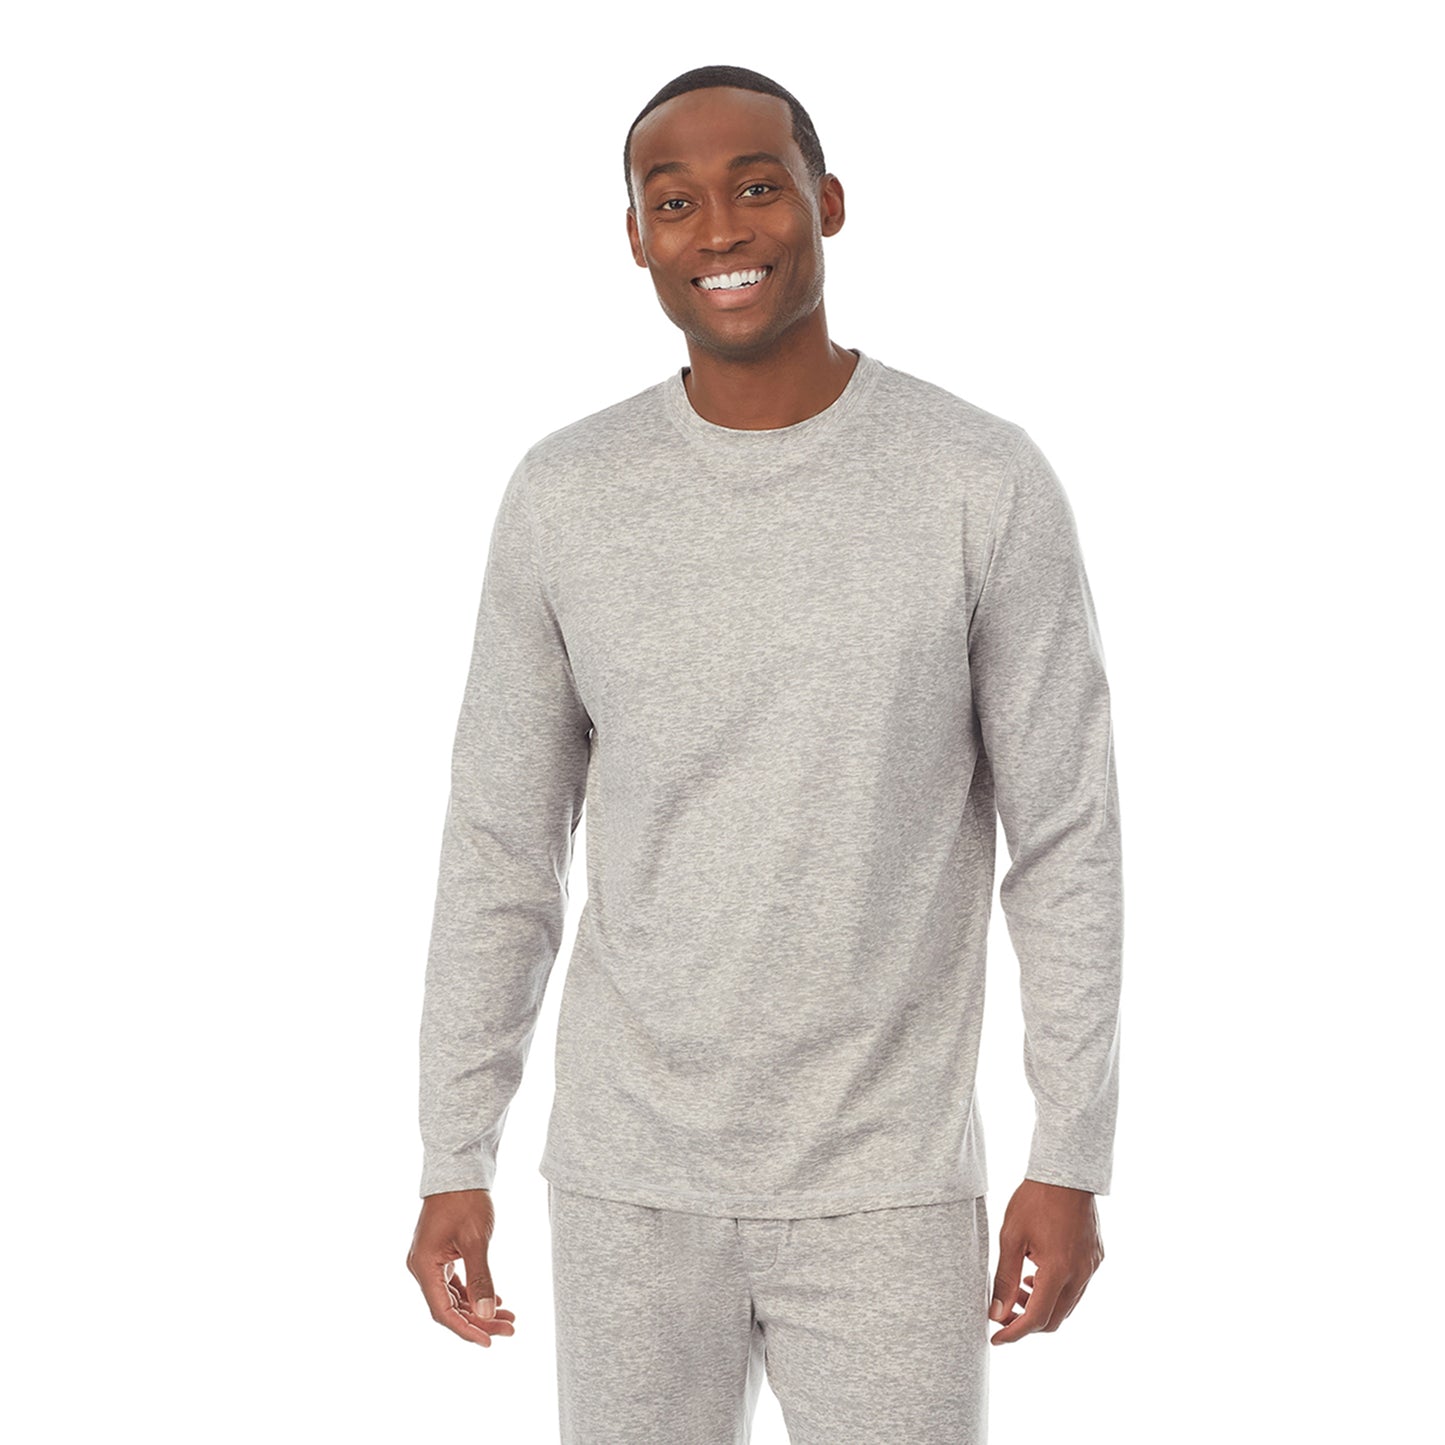 Grey Heather;Model is wearing size M. He is 6'1", Waist 30.5", Inseam 32".@ A lady wearingMens Far-Infrared Enhance Sleep Long Sleeve Crew Neck Top with Grey Heather print